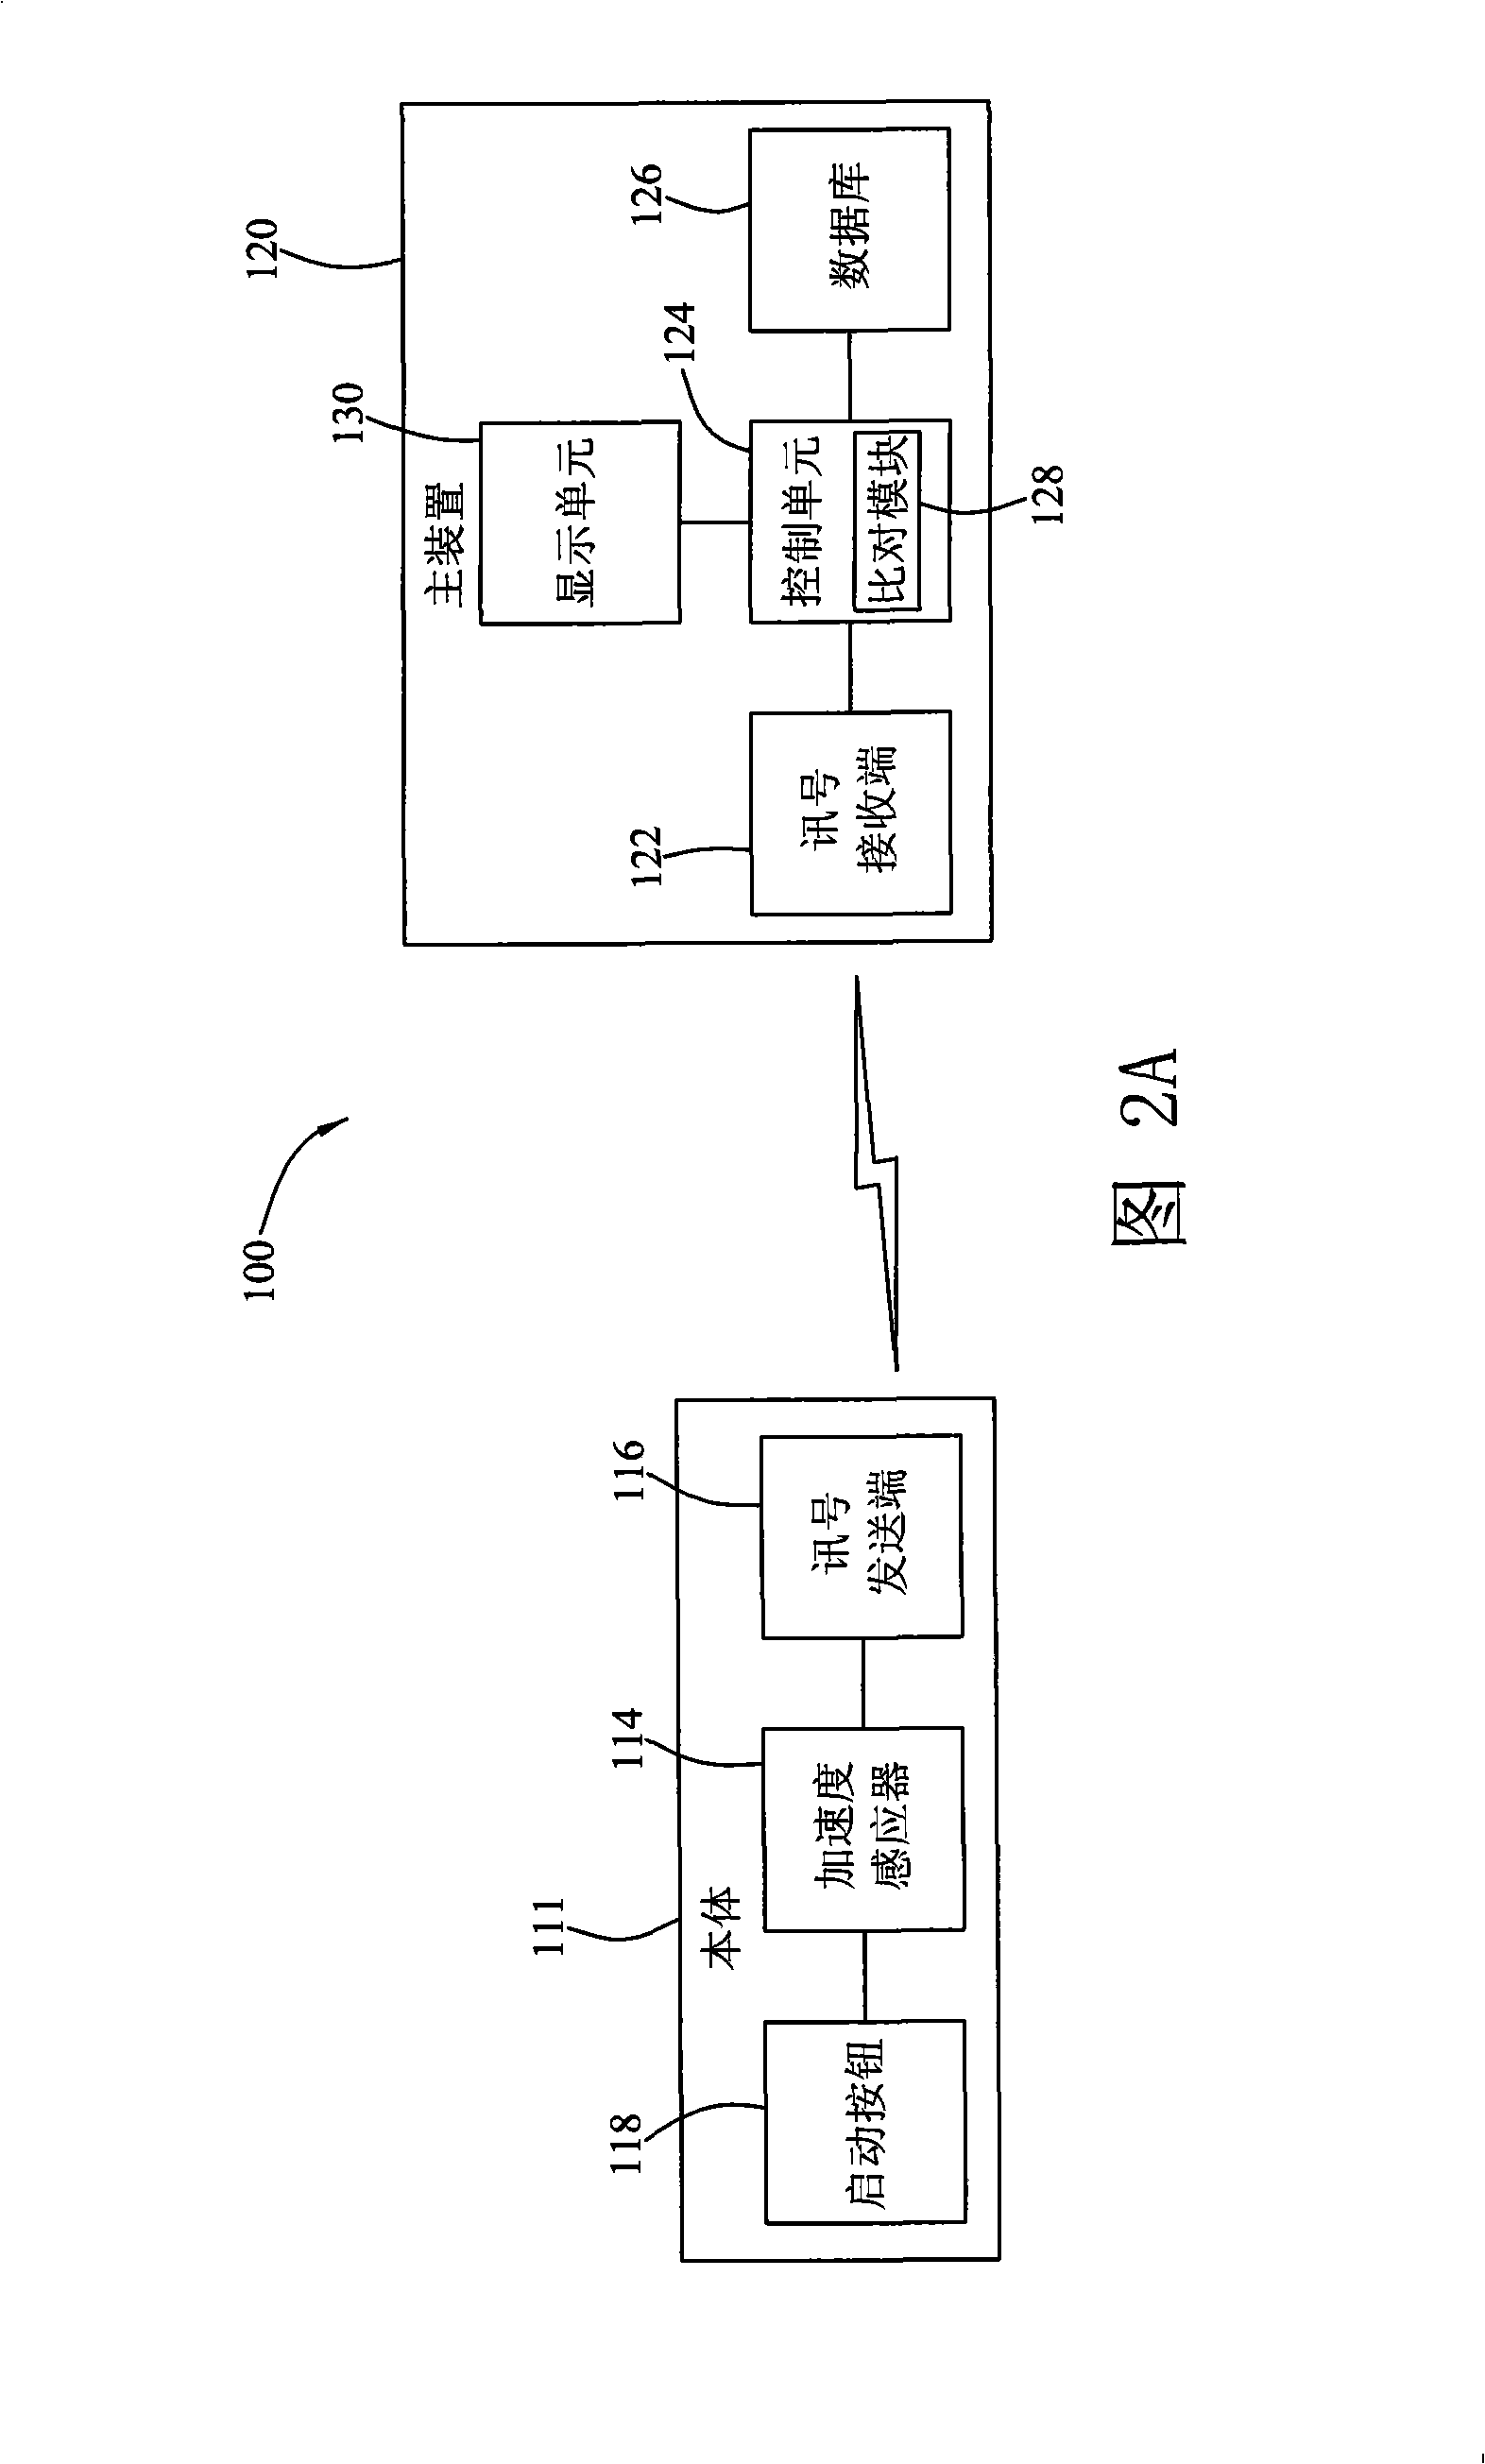 Non-contact type finger operation and control system and its method